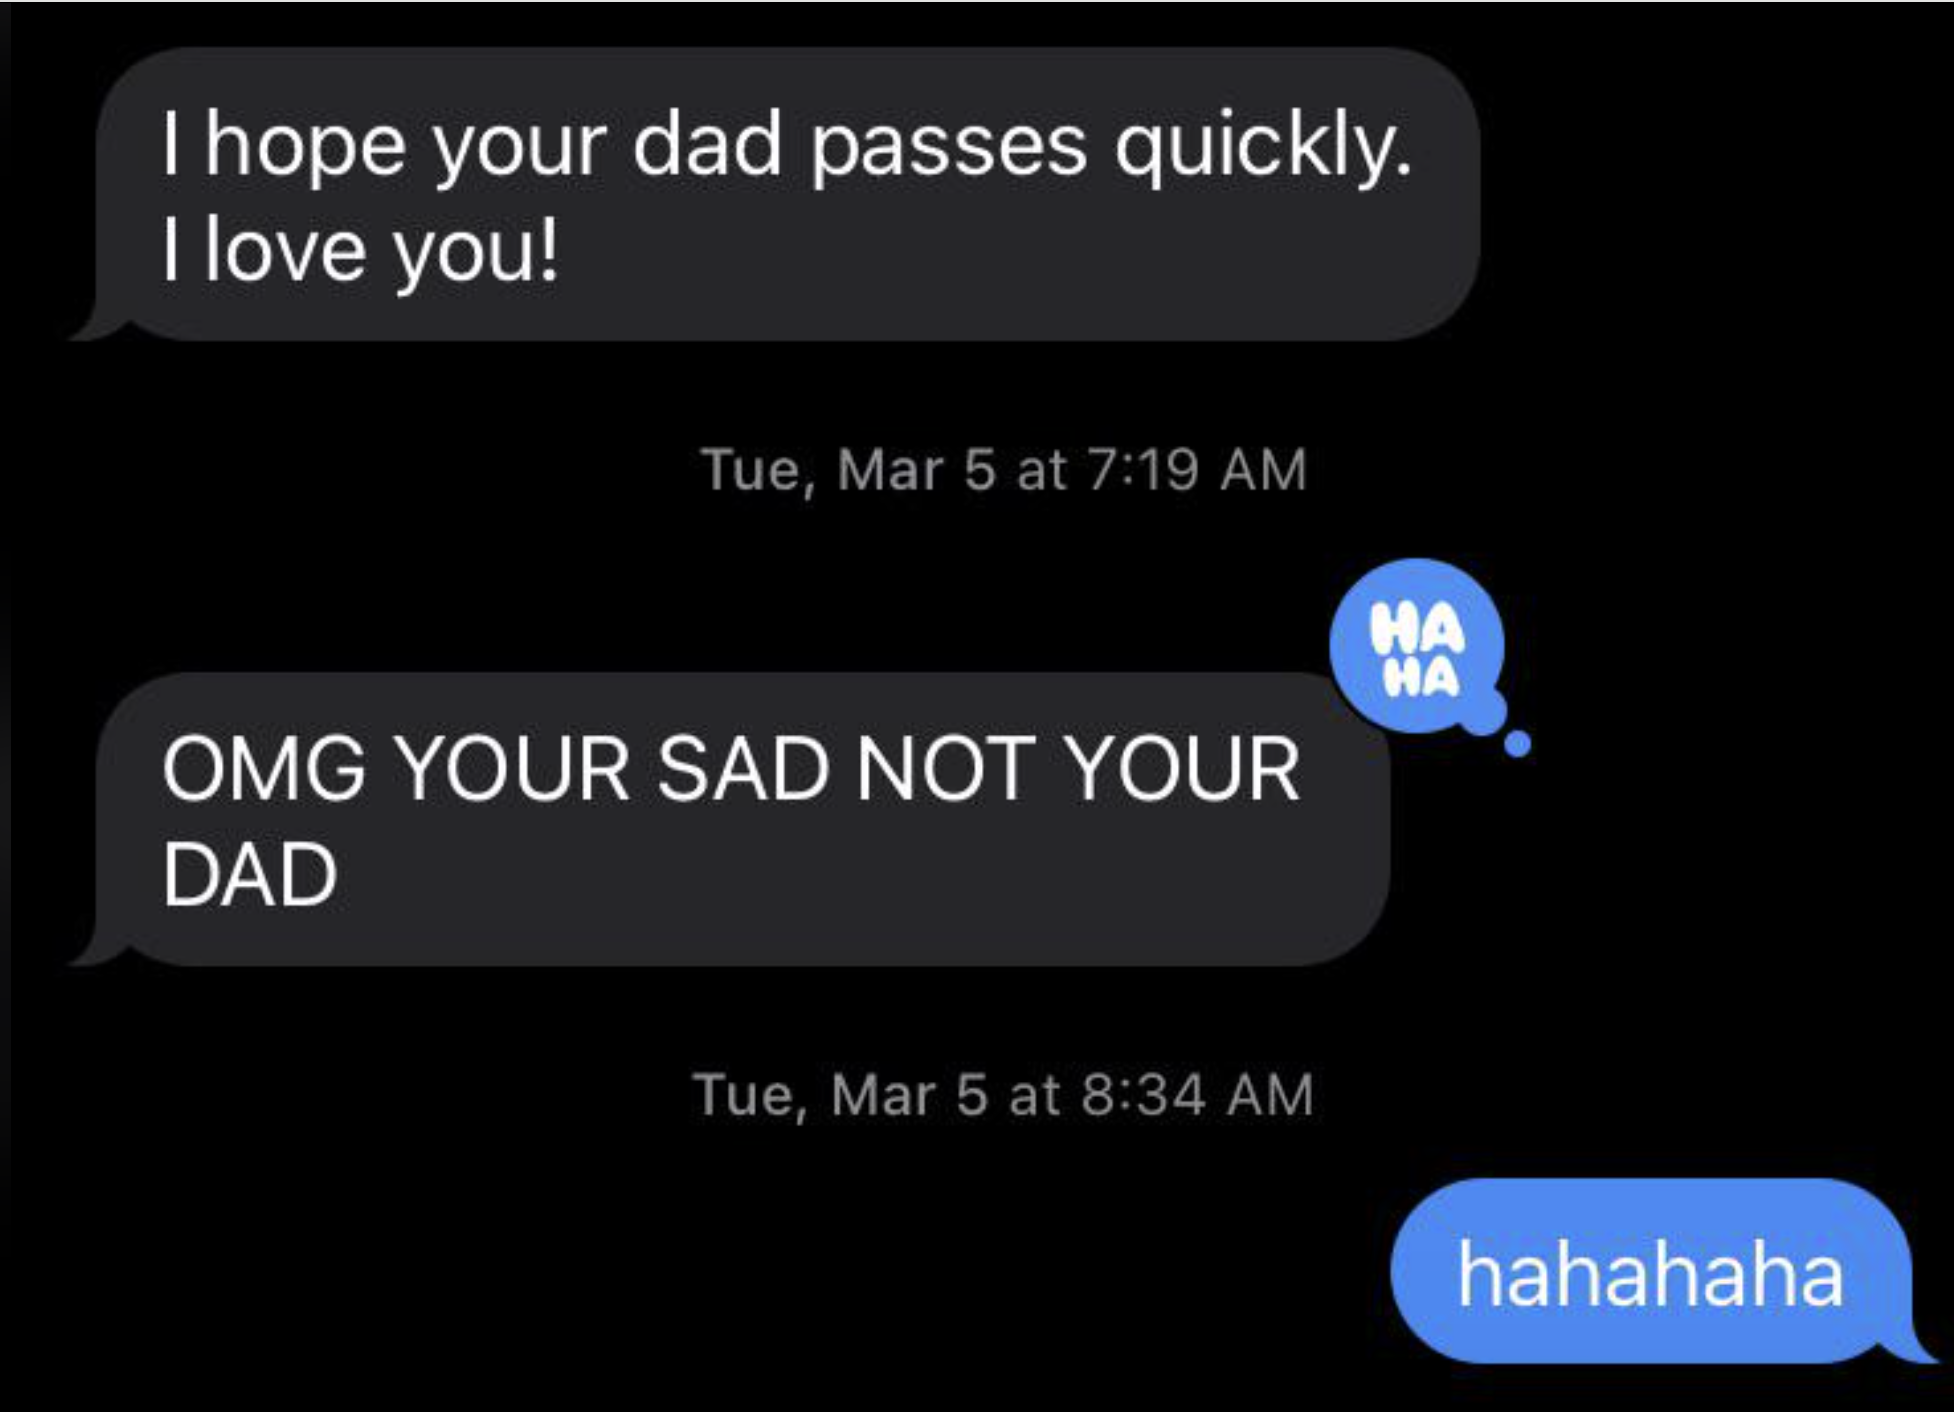 Text message conversation: First person mistakenly expresses hope for the dad to pass quickly, but later corrects it to &quot;your sad&quot; not &quot;your dad&quot;. Second person replies with laughter